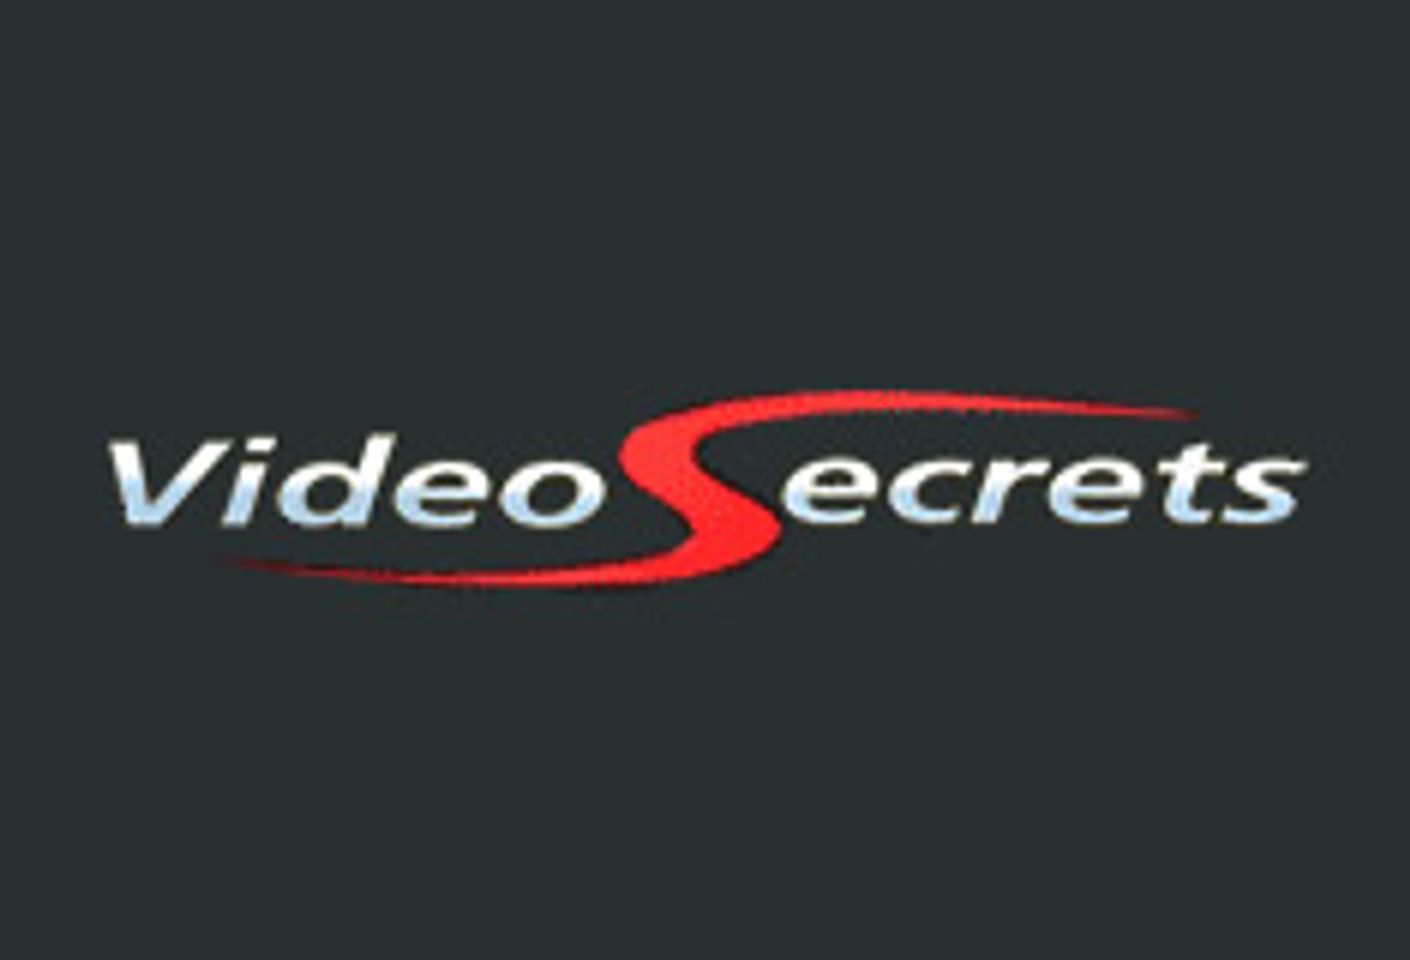 Video Secrets Partners with Liberator